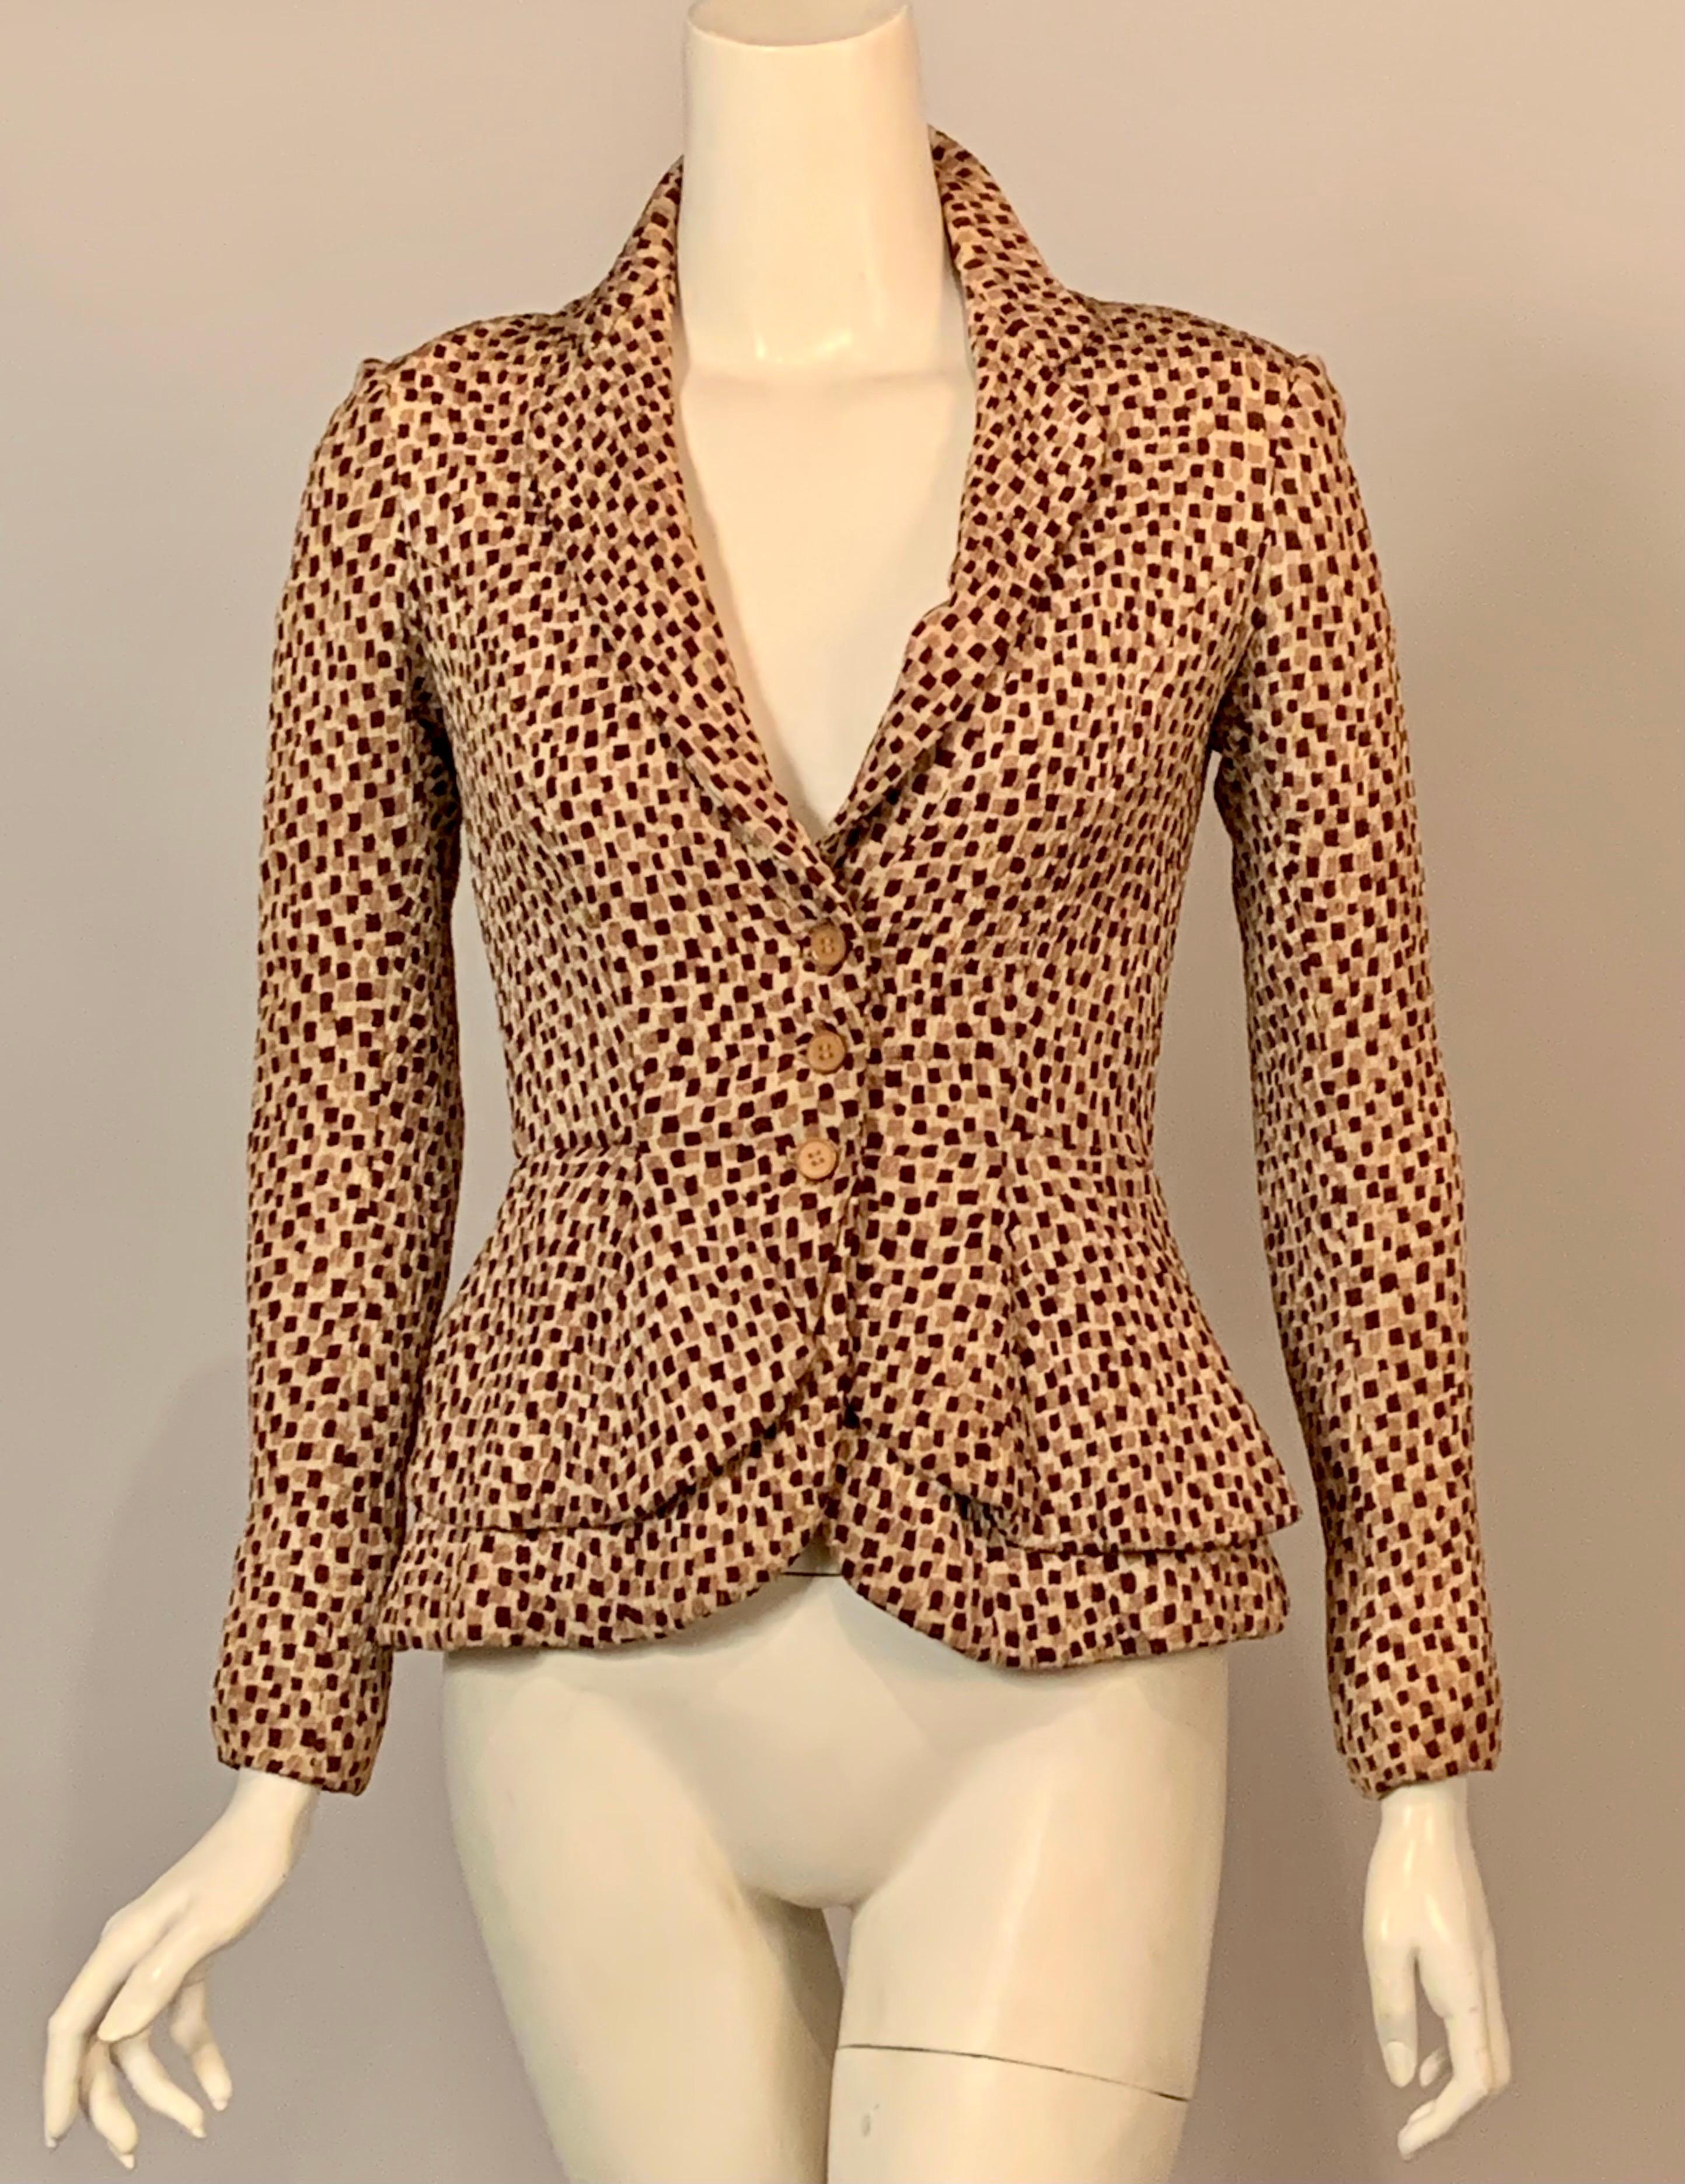 This is a great example of French haute Couture from the 1940's.  Edward Molyneux chose a modern fabric design and padded the shoulders as well as the peplum of this three button jacket.  The label is missing but it is easy to identify it as